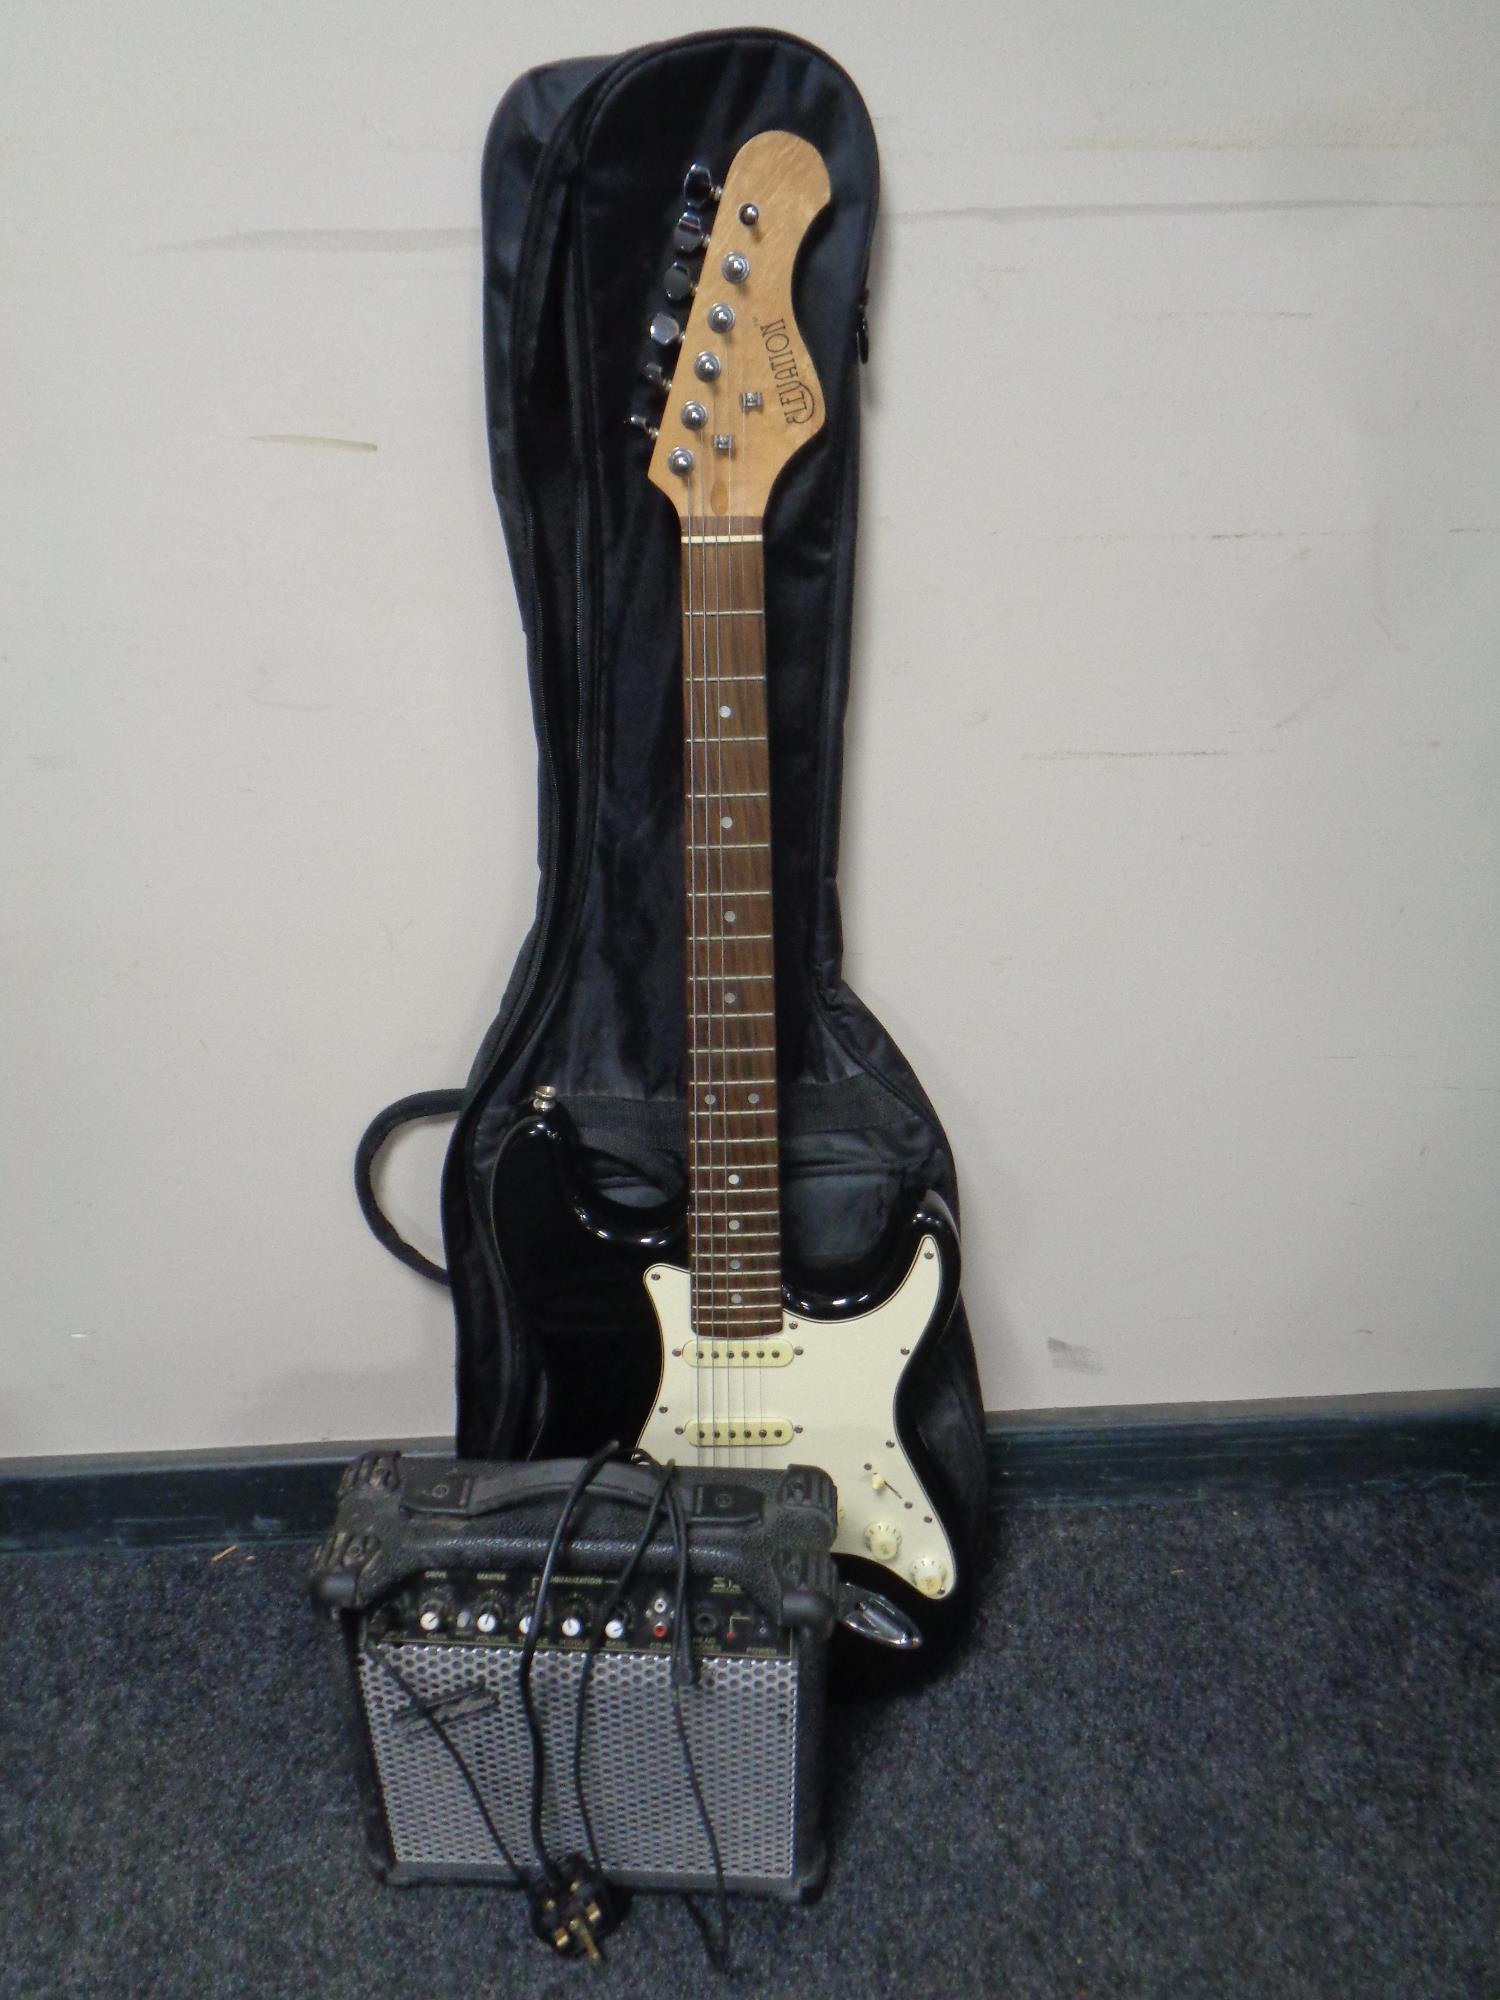 An Elevation electric guitar together with a Gear 4 Music S15G guitar amplifier.